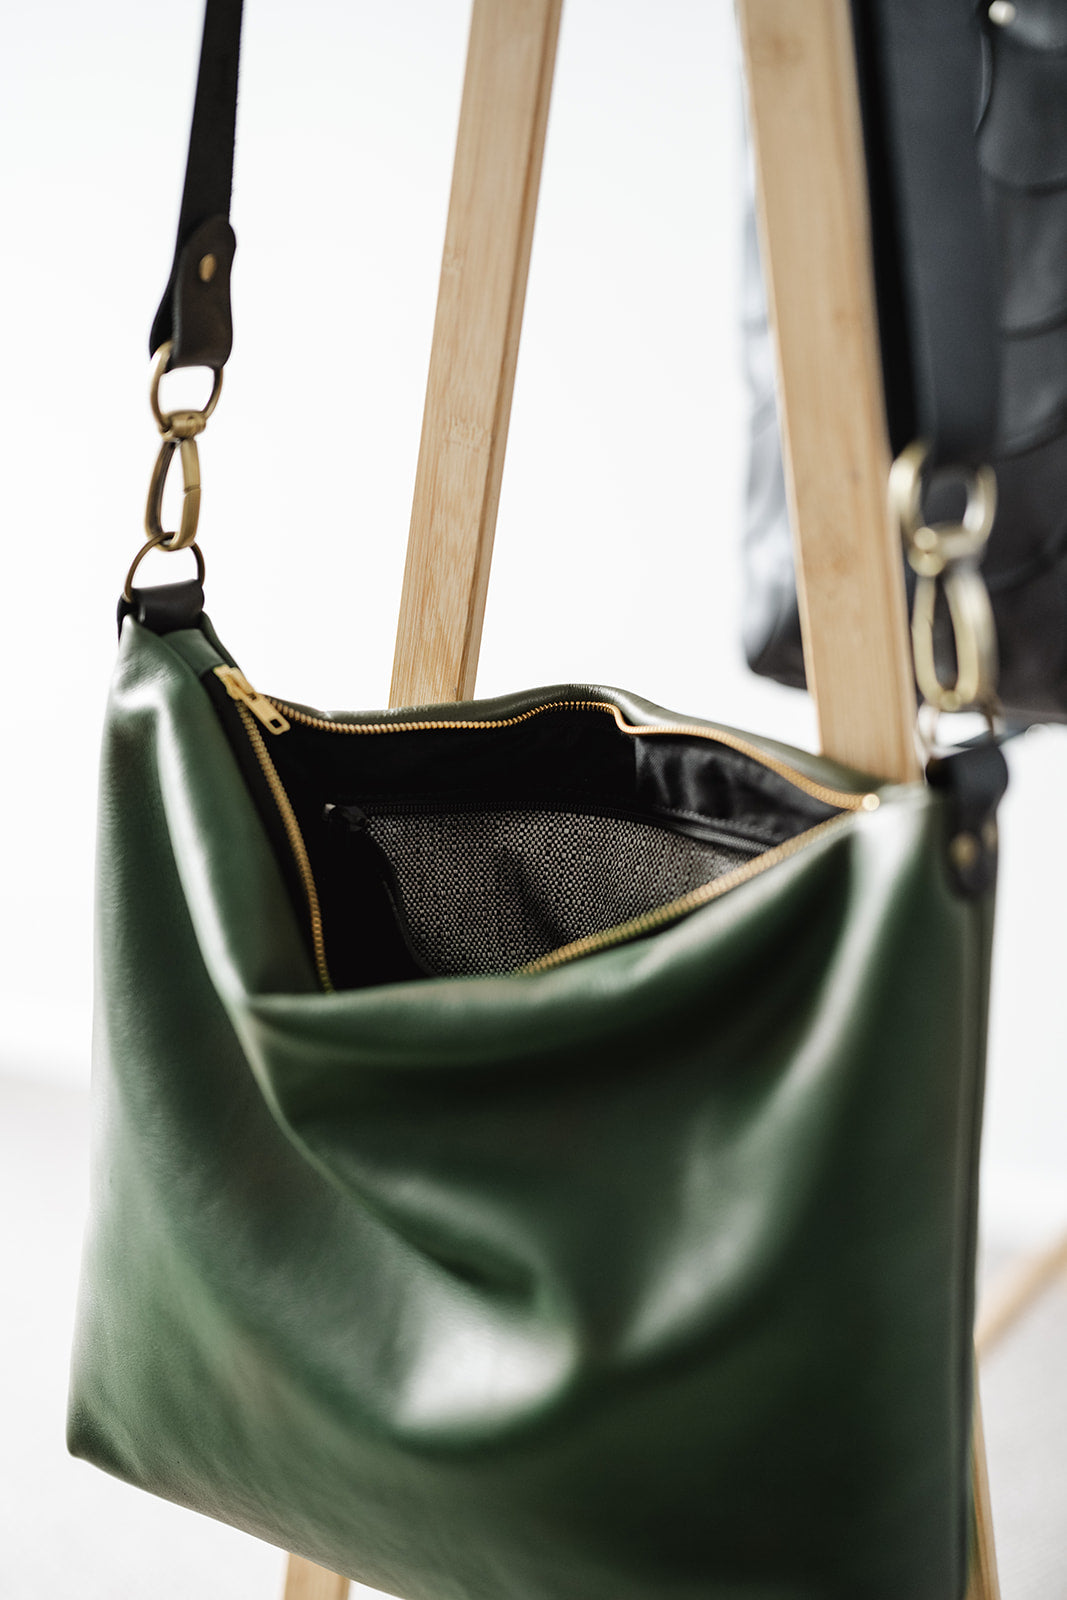 Moss Green Leather Carryall bag in Ella Jackson brand hanging on timber clothes rack showing open bag, strap, gold zip and internal pocket with white and black commercial fabric